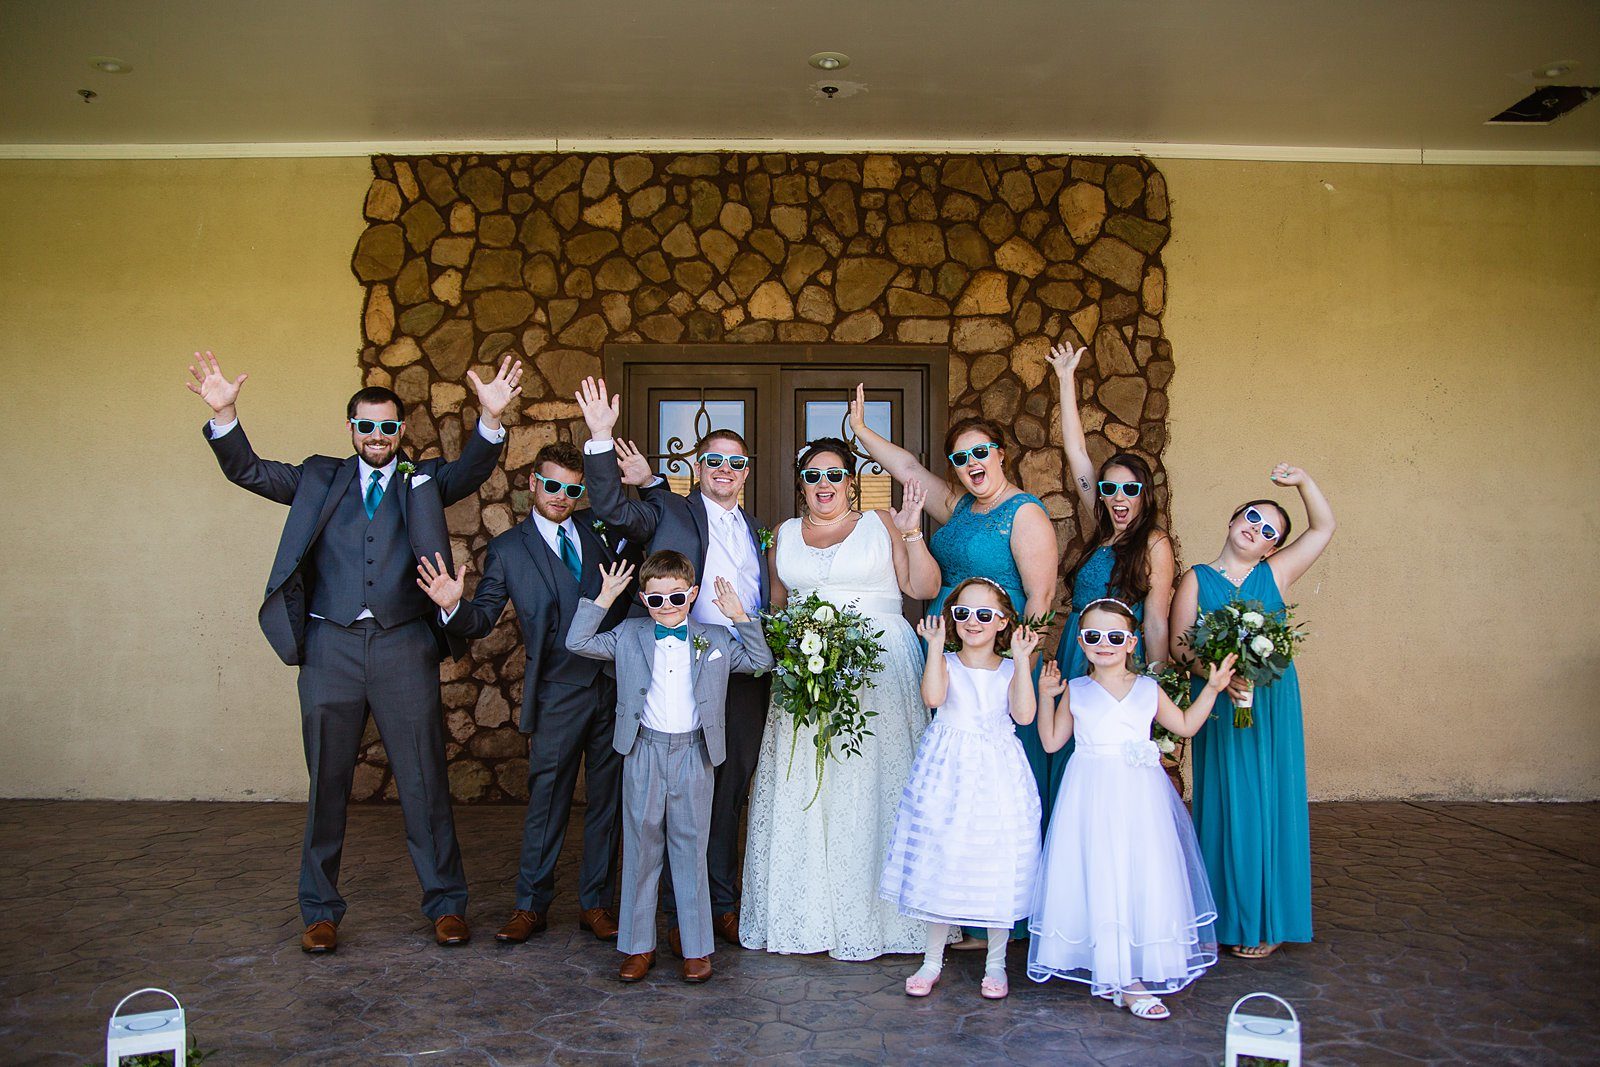 Bridal party having fun together at Superstition Manor weding by Arizona wedding photographer PMA Photography.